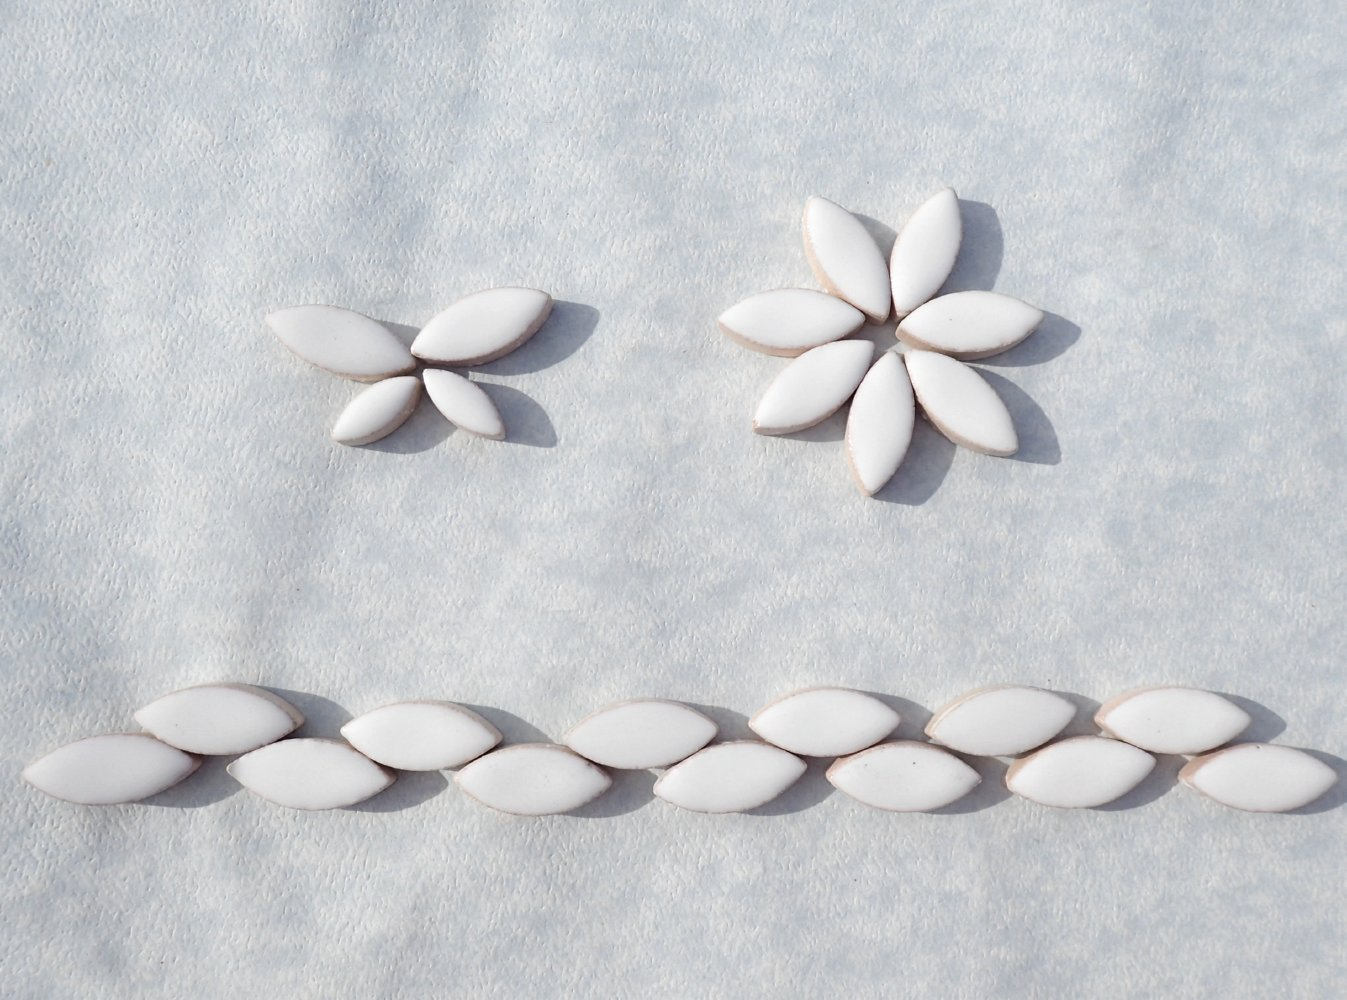 White Petals Mosaic Tiles - 50g Ceramic Leaves in Mix of 2 Sizes 1/2" and 3/4"